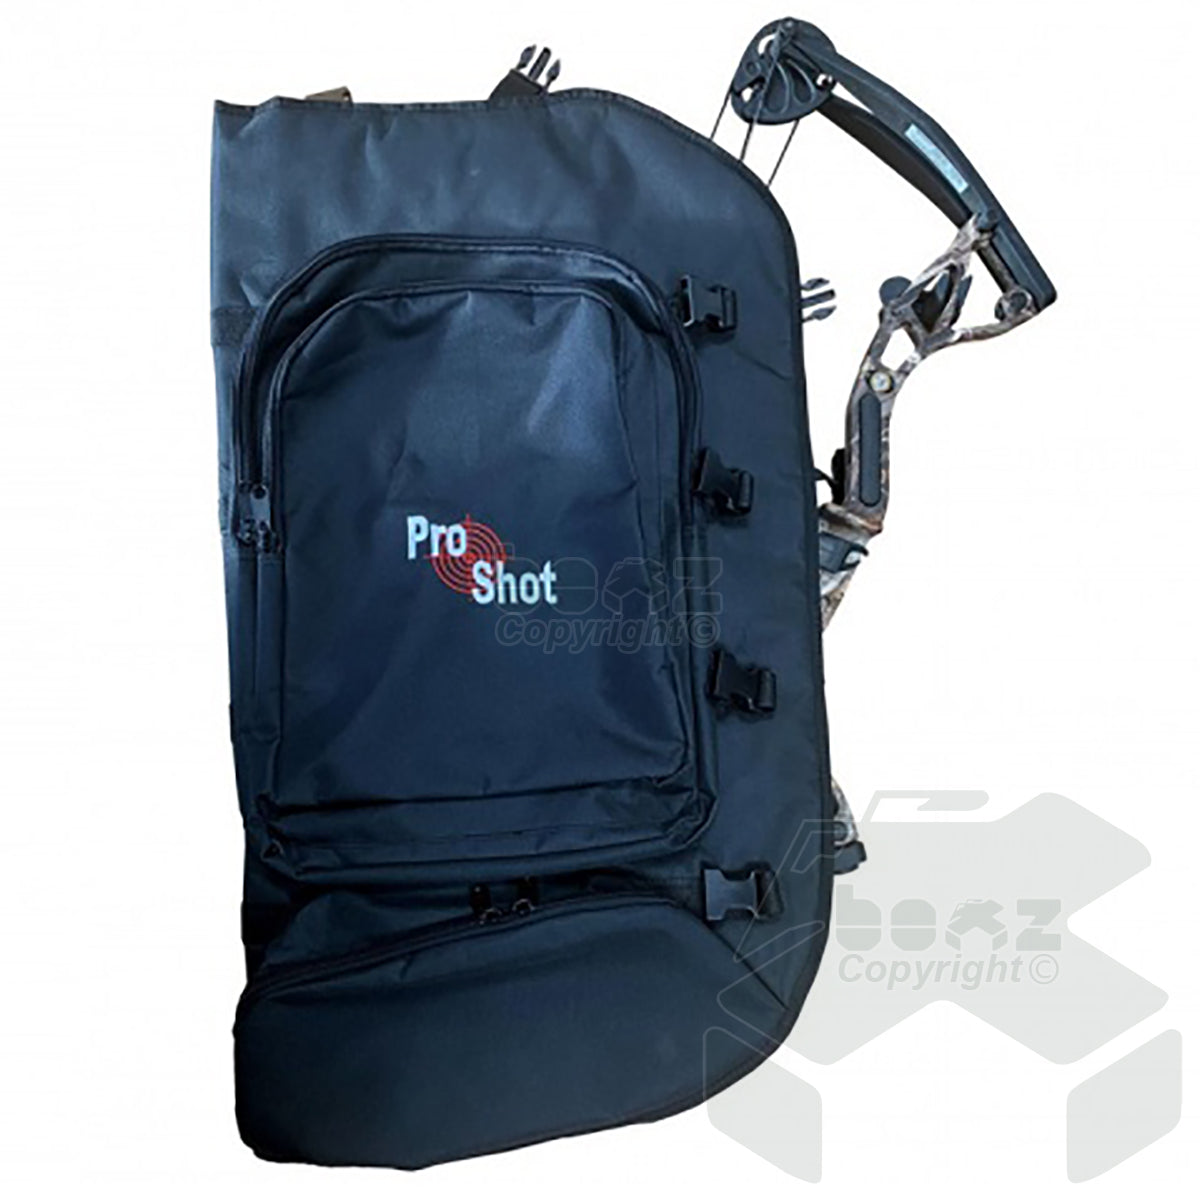 Proshot Deluxe Padded Backpack Compound Bow Bag